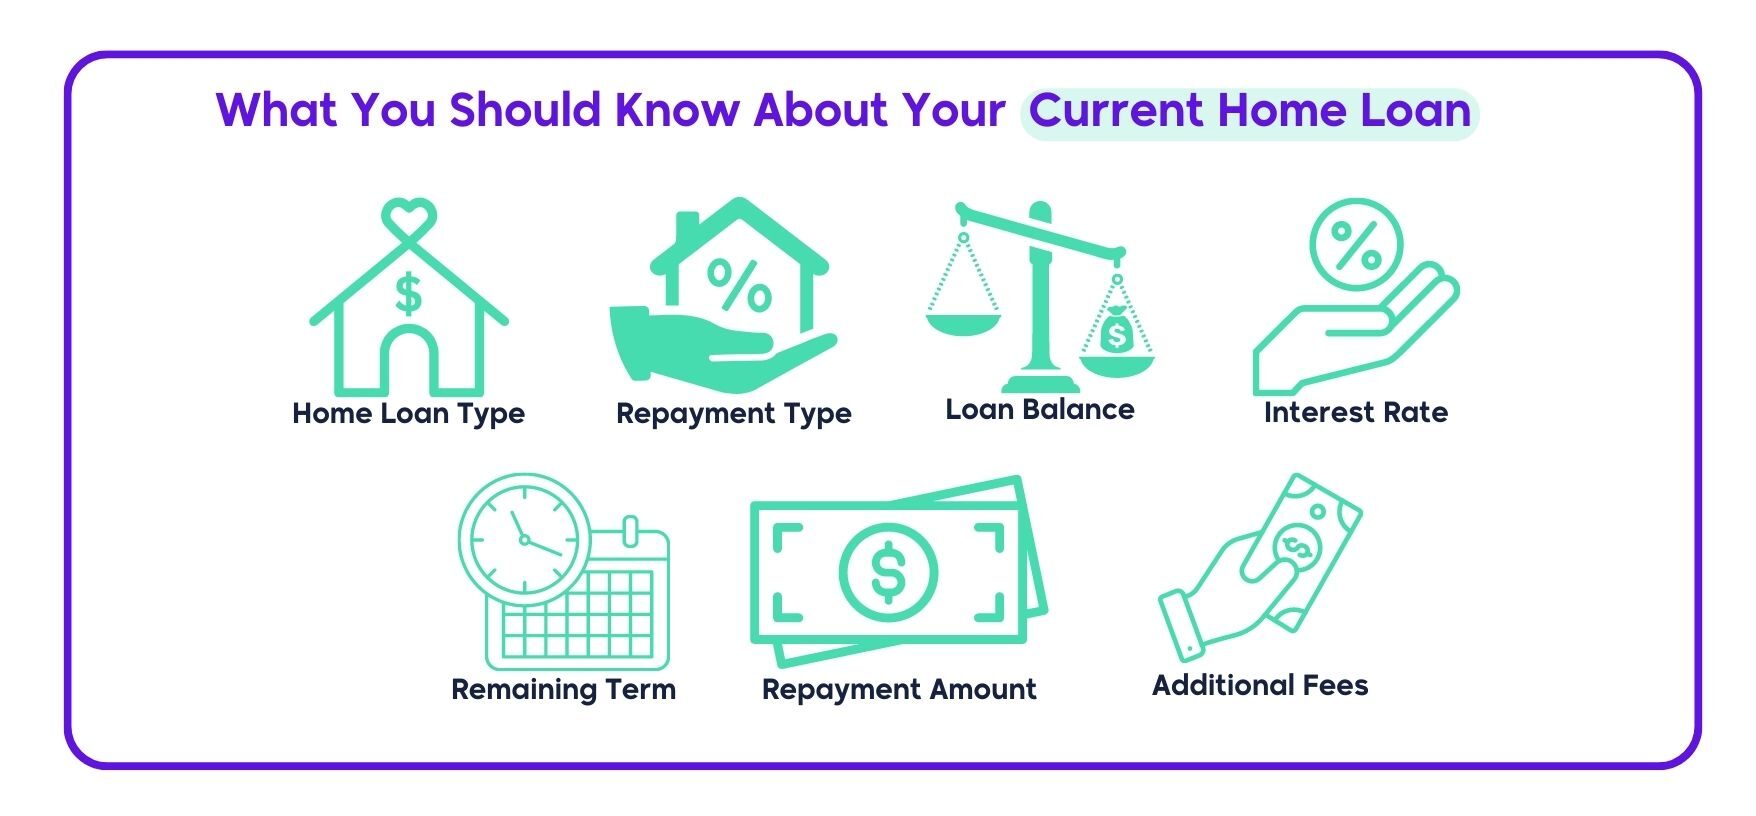 Details You Should Know About Your Current Home Loan